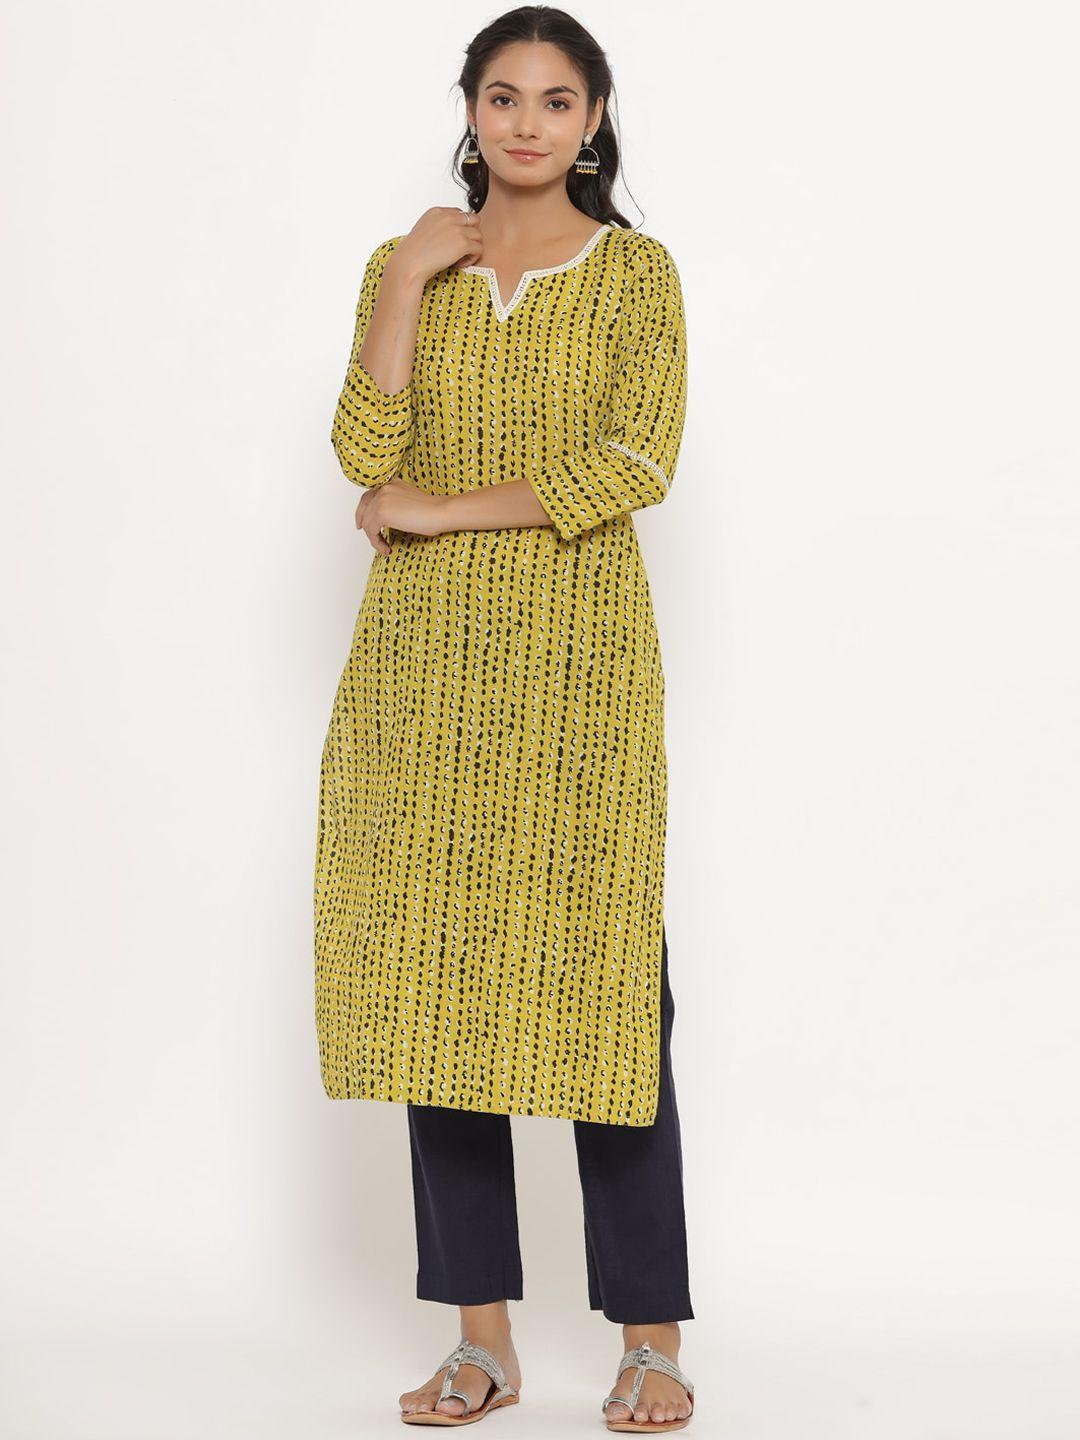 crafiqa floral printed pure cotton kurta with trousers